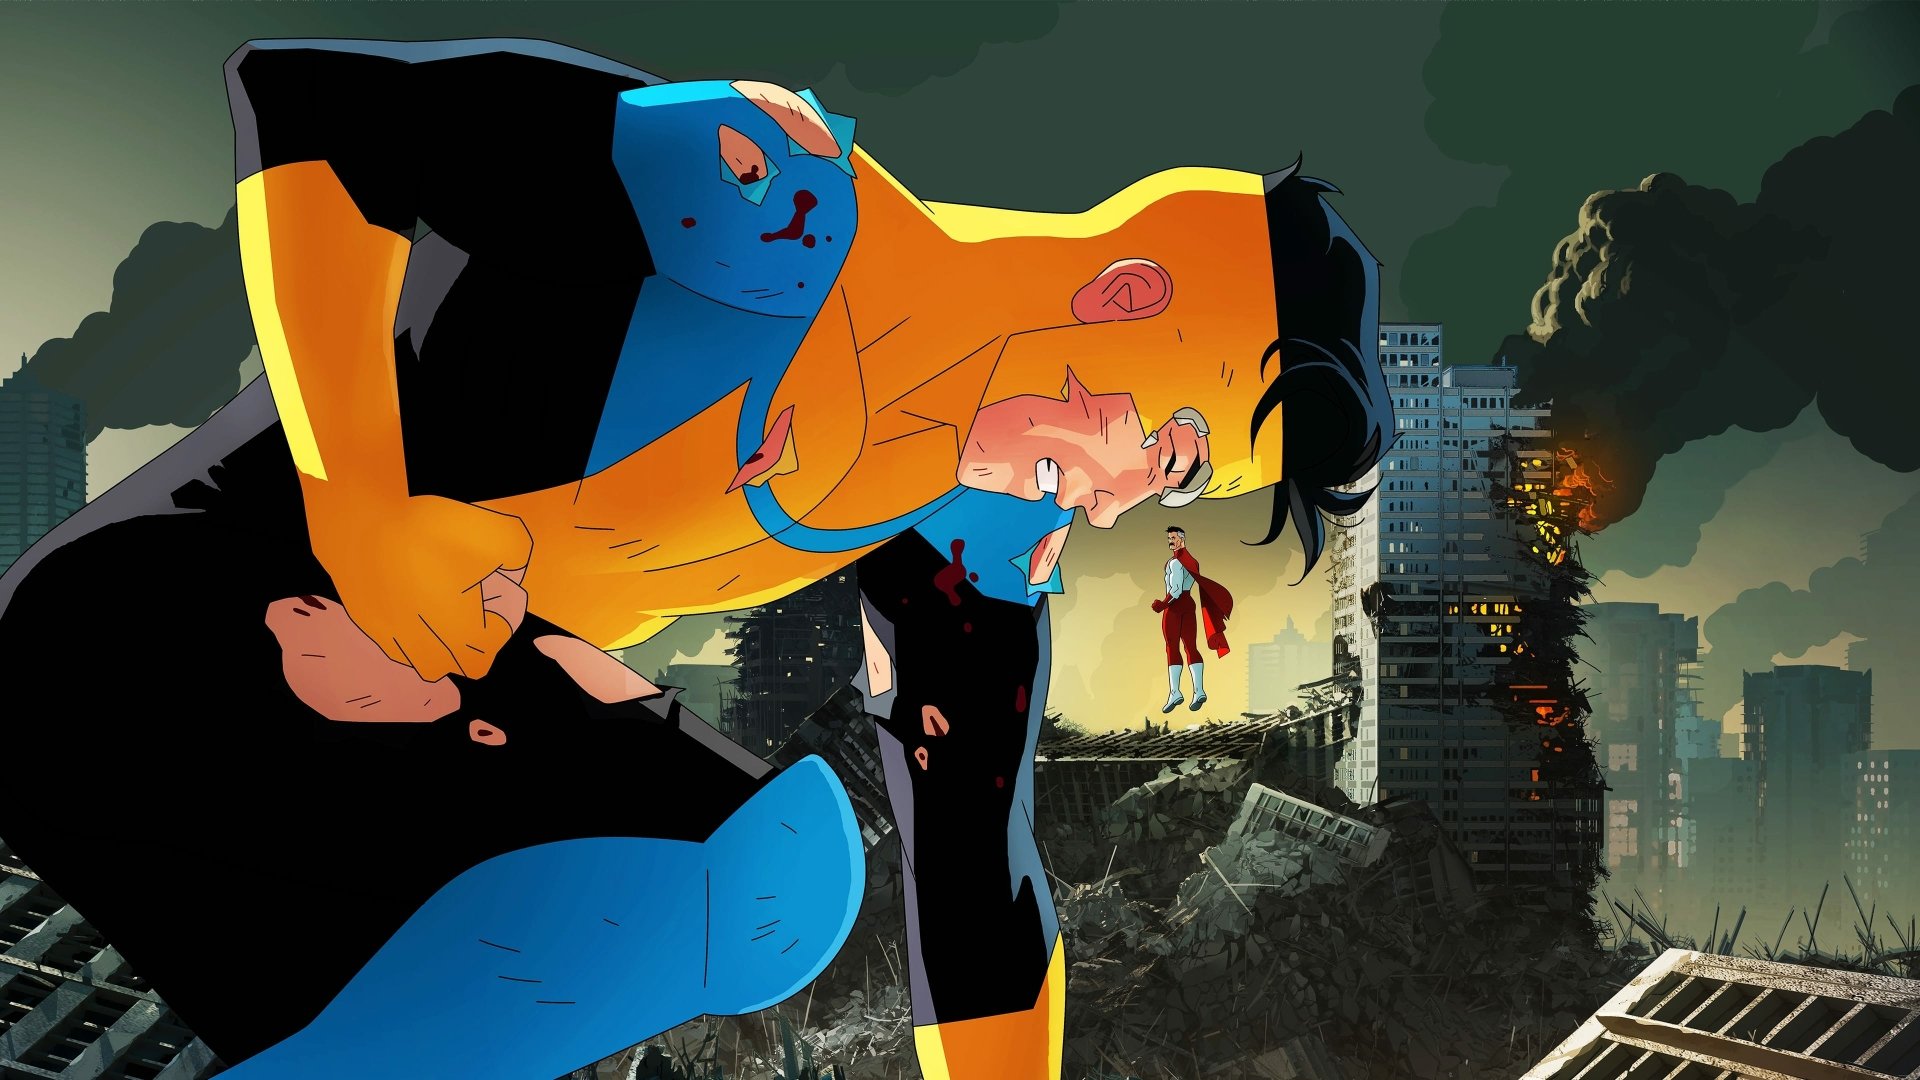 Mark Grayson and Omni-Man from the Invincible TV show on Image Comics. Vibrant HD desktop wallpaper and background.